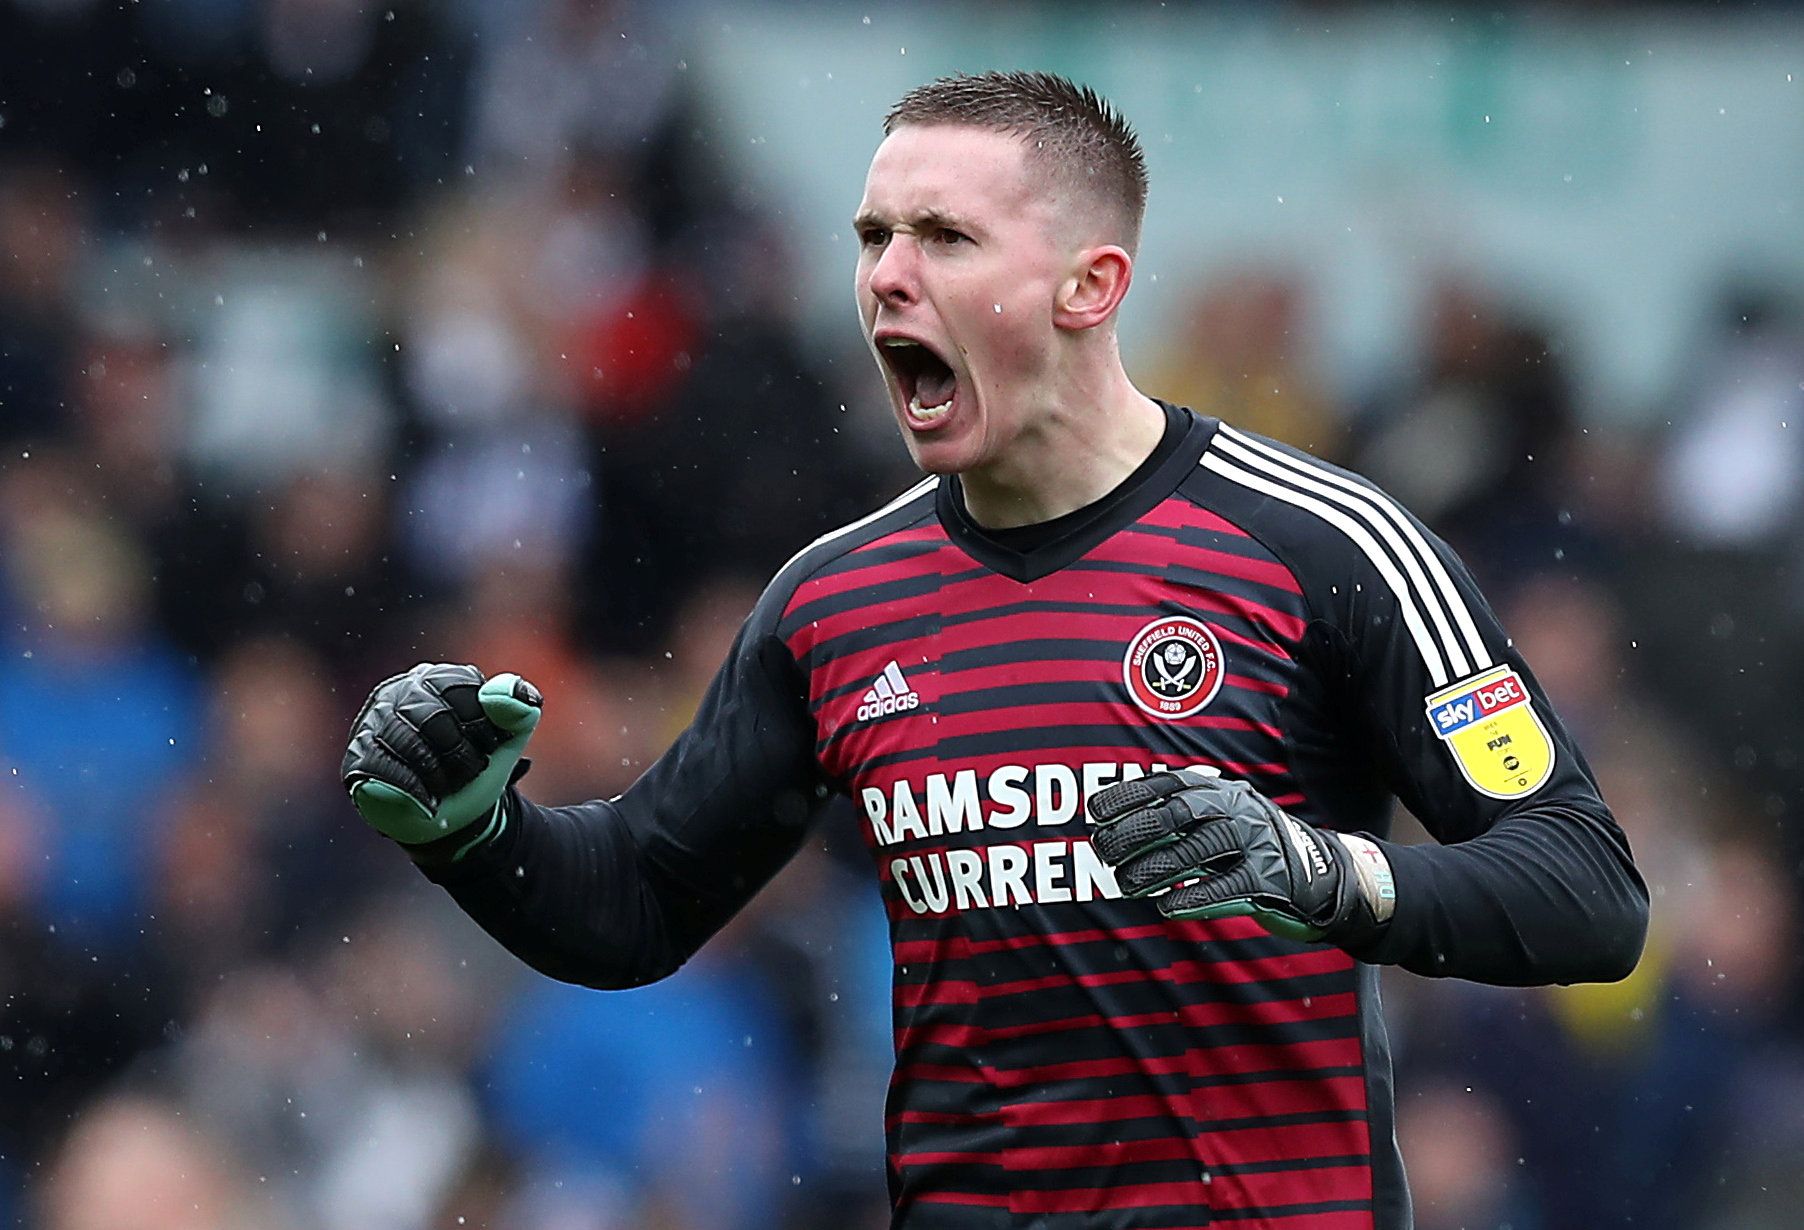 Soccer Football - Championship - Leeds United v Sheffield United - Elland Road, Leeds, Britain - March 16, 2019   Sheffield United's Dean Henderson celebrates at the end of the match   Action Images/John Clifton    EDITORIAL USE ONLY. No use with unauthorized audio, video, data, fixture lists, club/league logos or 